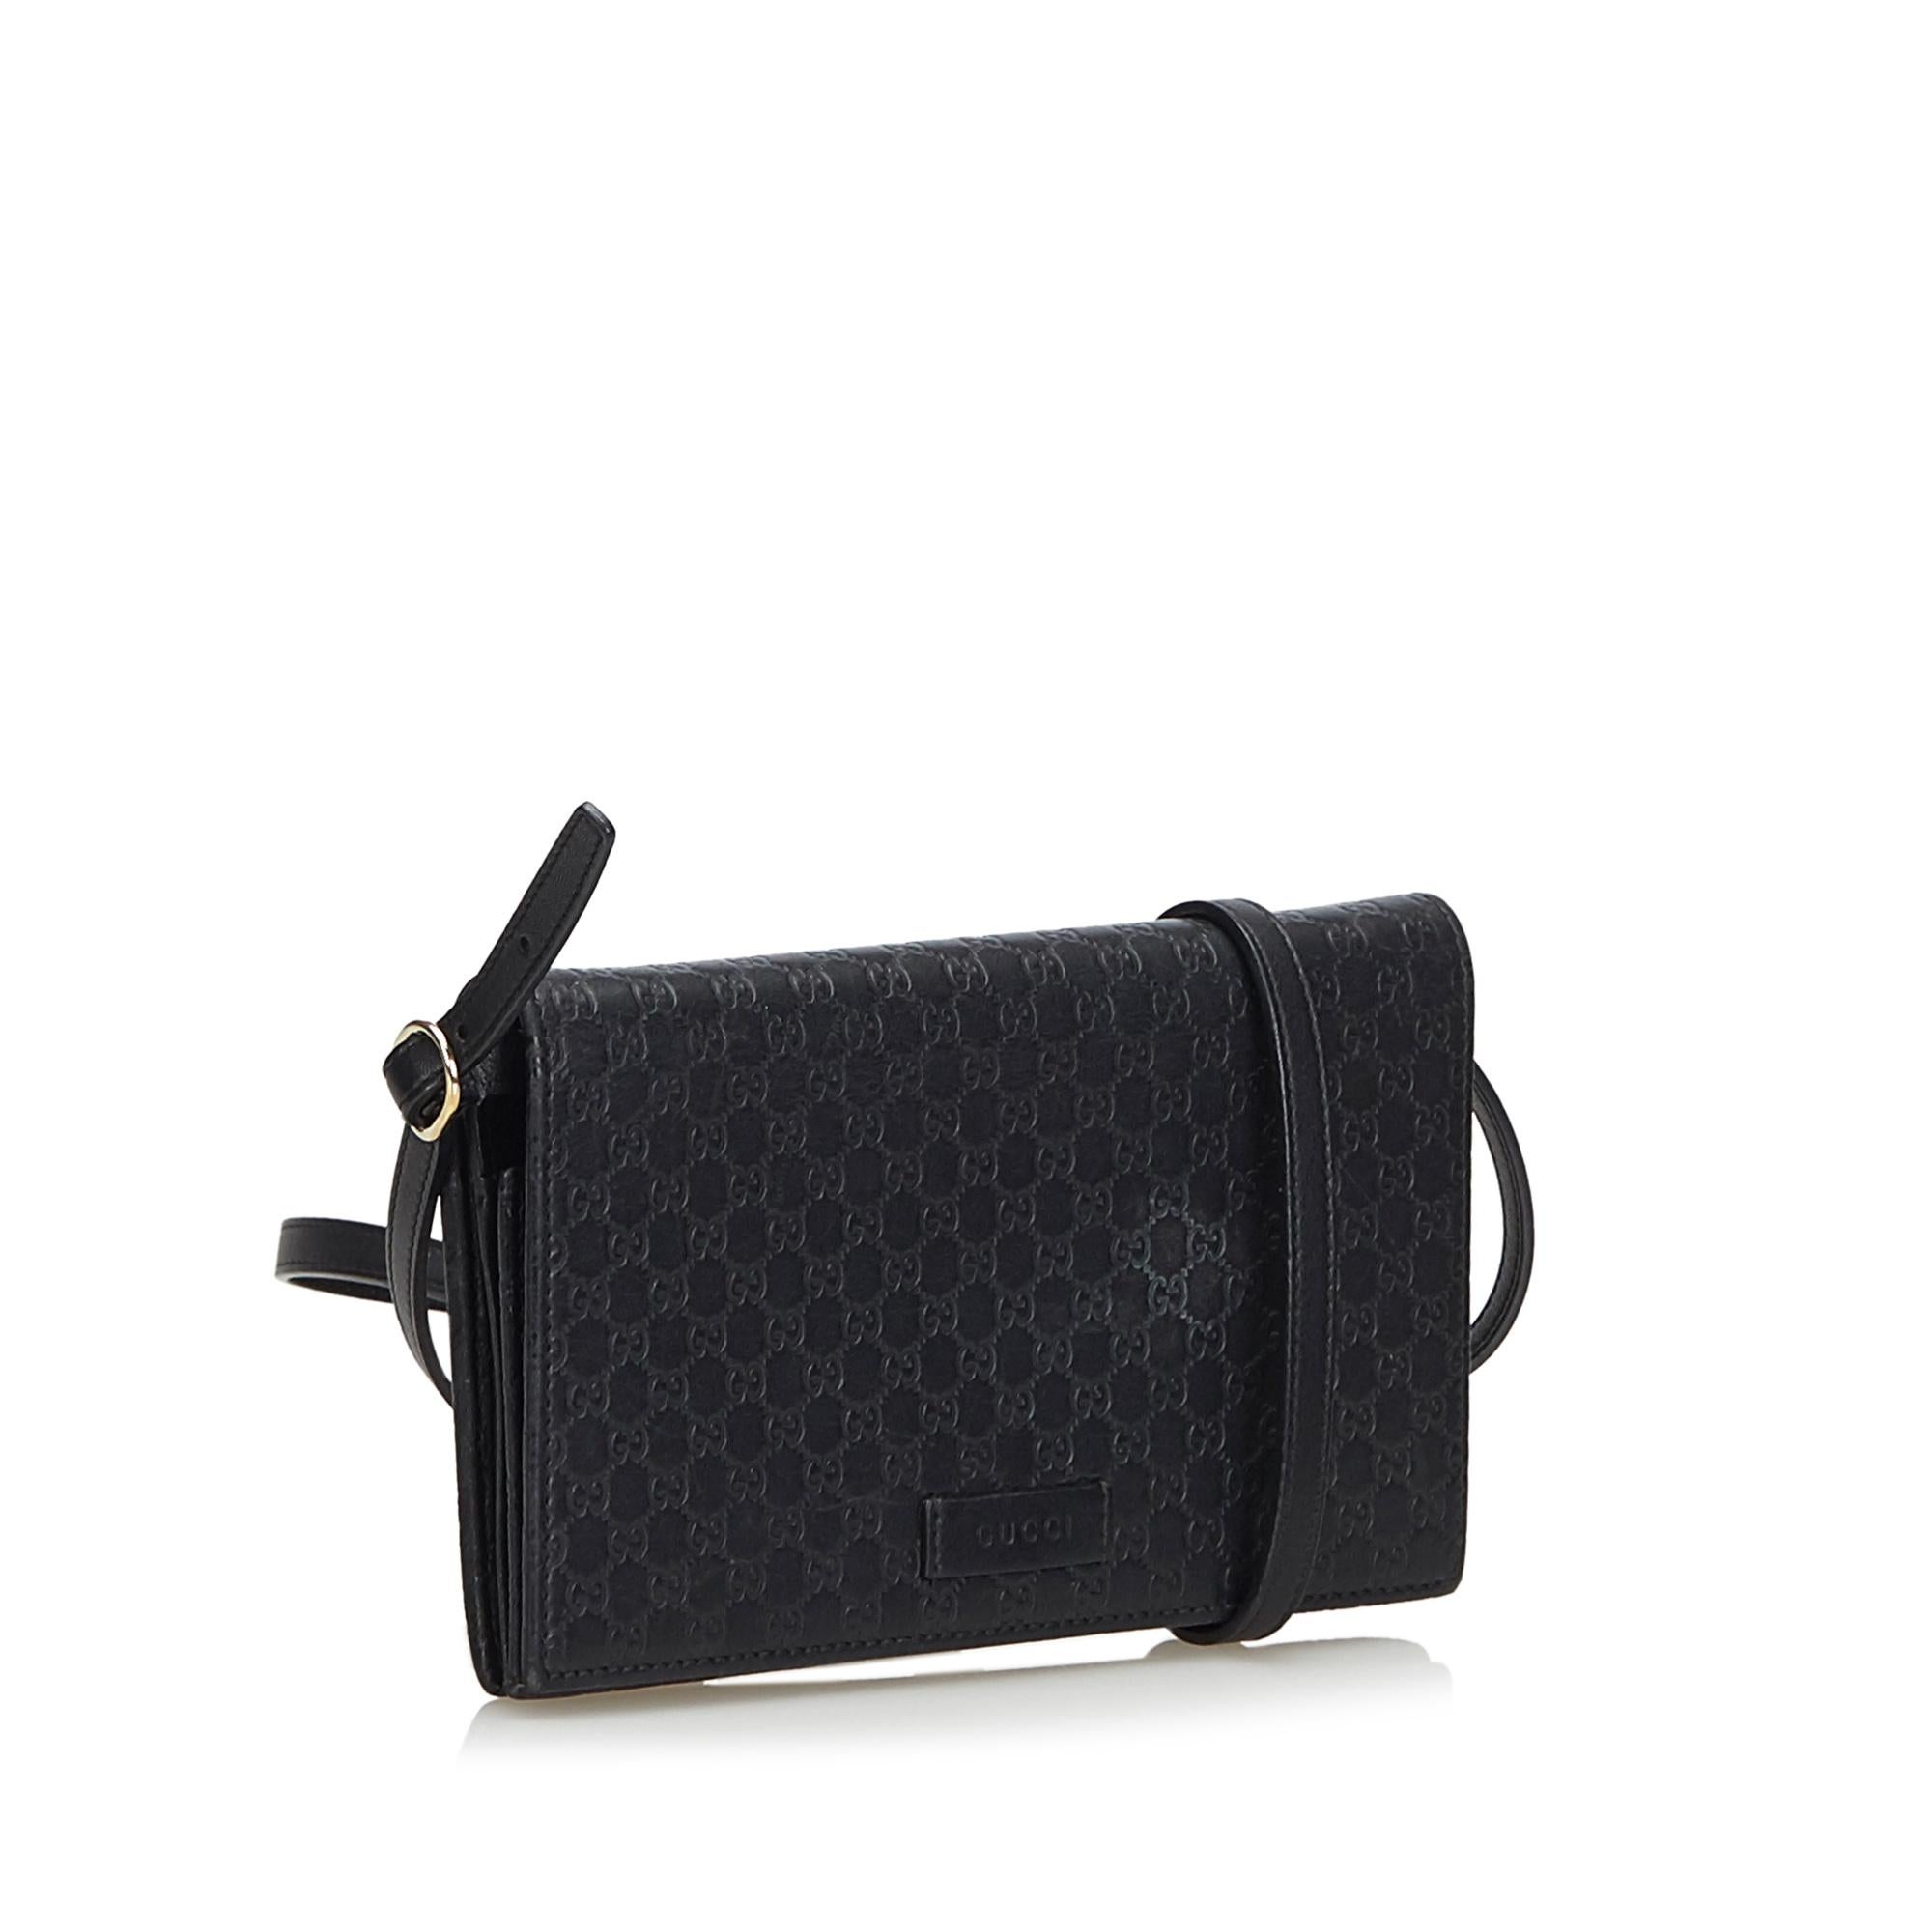 This long wallet features a leather body, a flat leather strap, a front flap with a magnetic closure, and interior zip and slip pockets. It carries as B+ condition rating.

Inclusions: 
This item does not come with inclusions.

Dimensions:
Length: